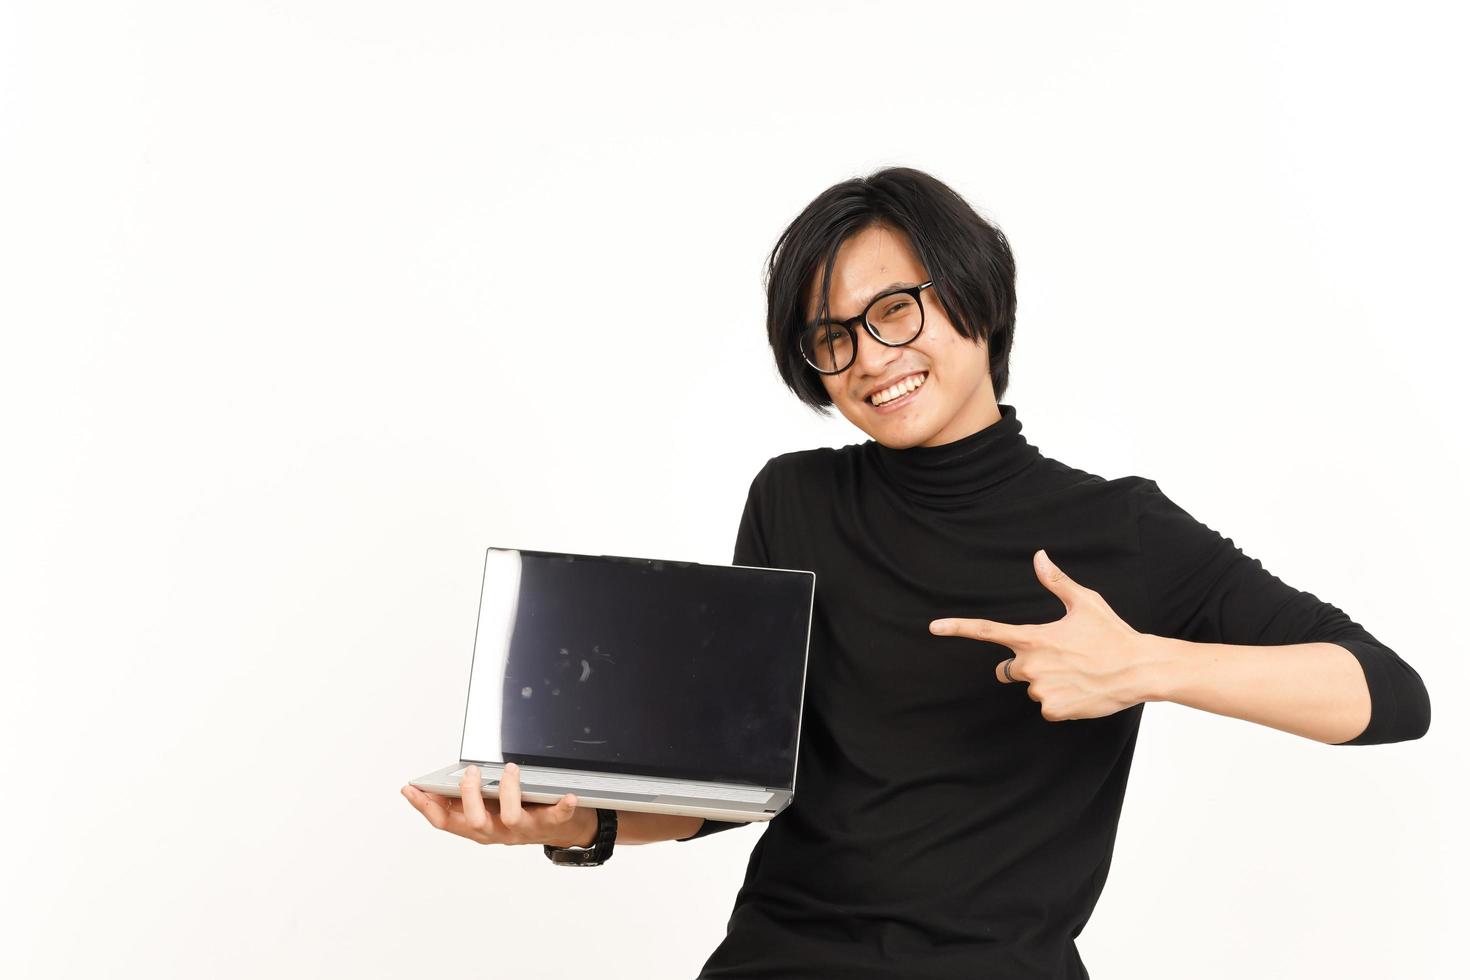 Showing Apps or Ads On Laptop Blank Screen Of Handsome Asian Man Isolated On White Background photo